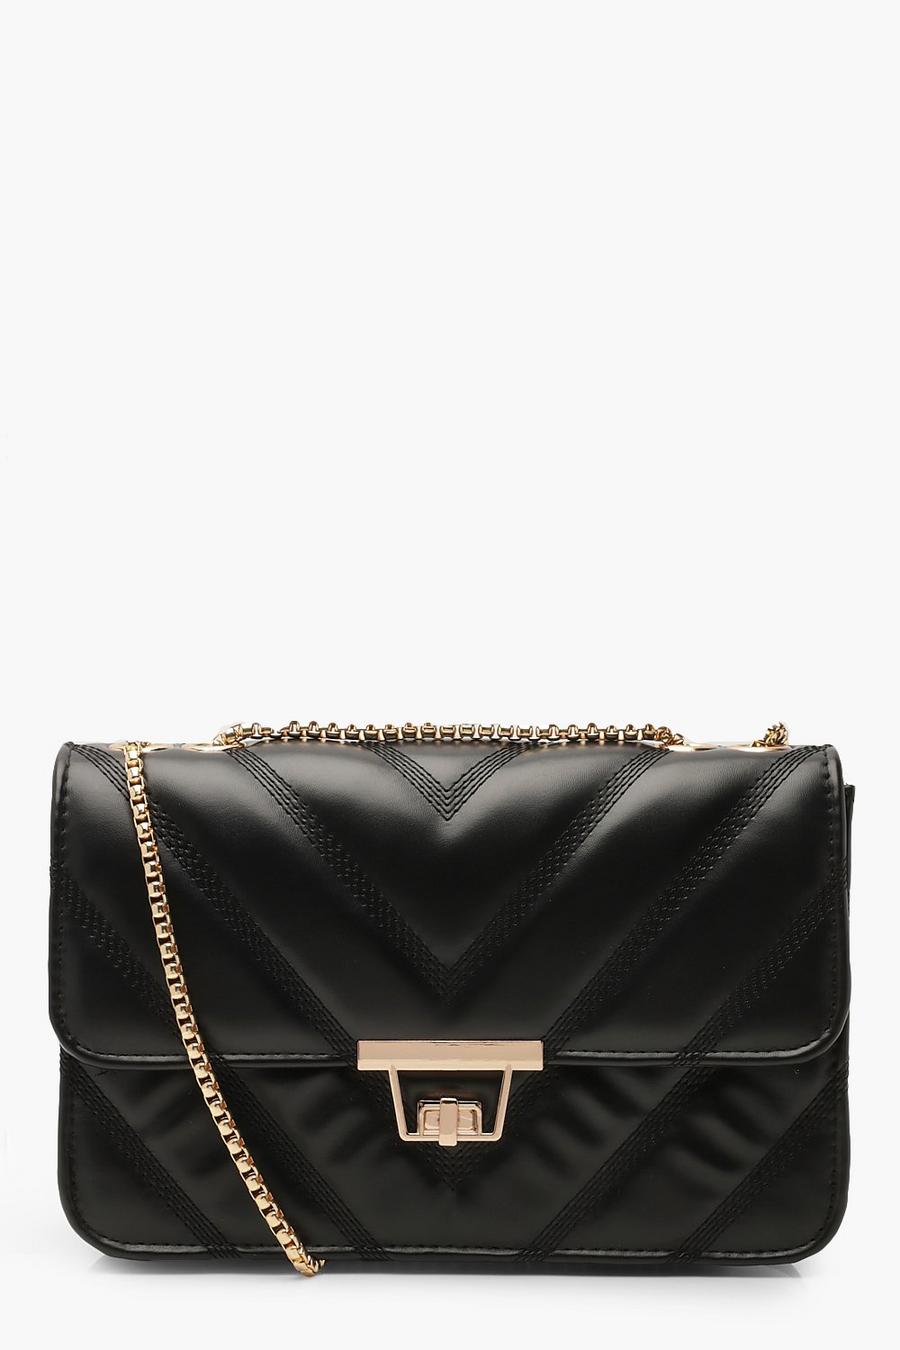 Black Love Moschino Logo Plaque Studded Top Handle Tote